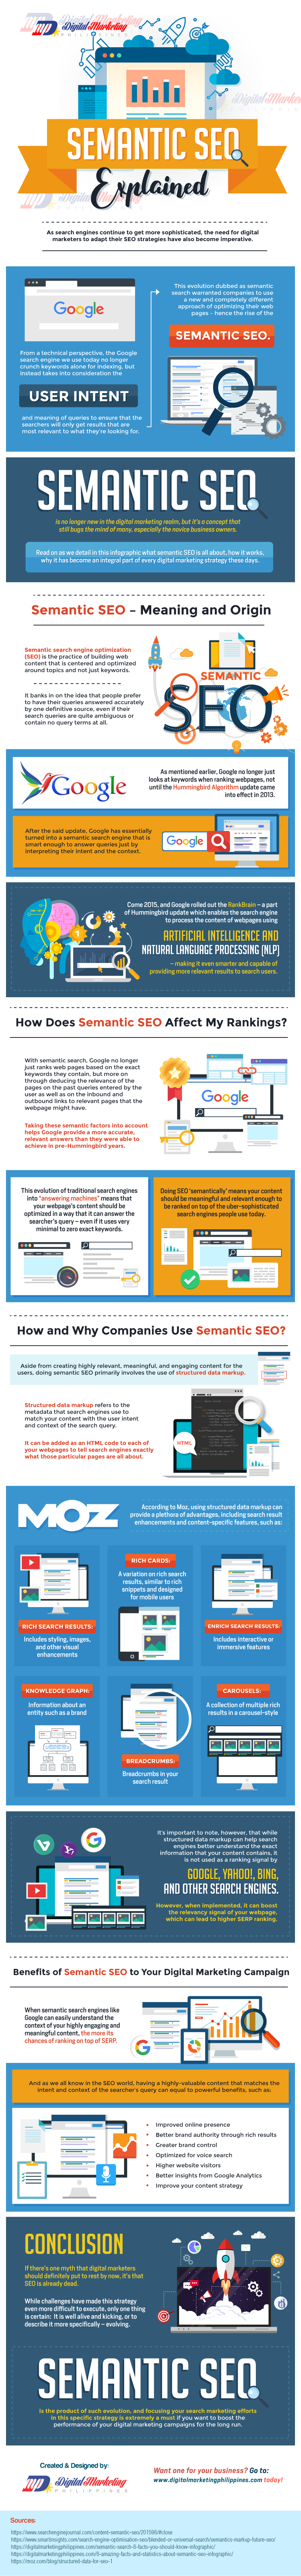 Semantic SEO Explained (Infographic) - An Infographic from Digital Marketing Philippines